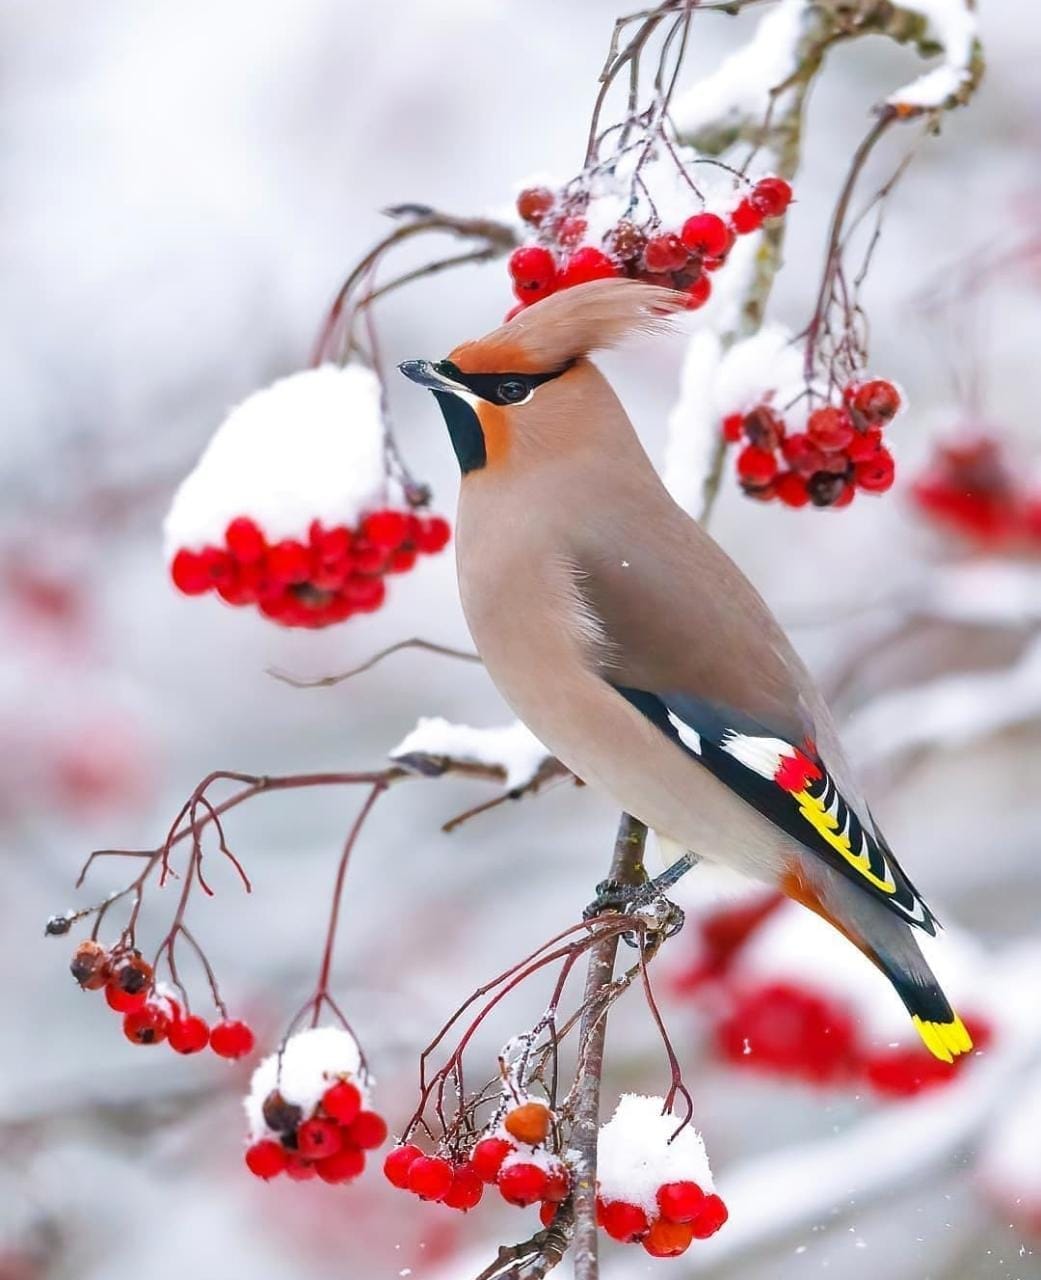 Bohemian Waxwings have an uncanny ability to find fruit nearly everywhere, almost like they have a GPS tracker for berries. Flocks sometimes turn up in desert areas, find an isolated shrub, devour its fruit in minutes, and move on.